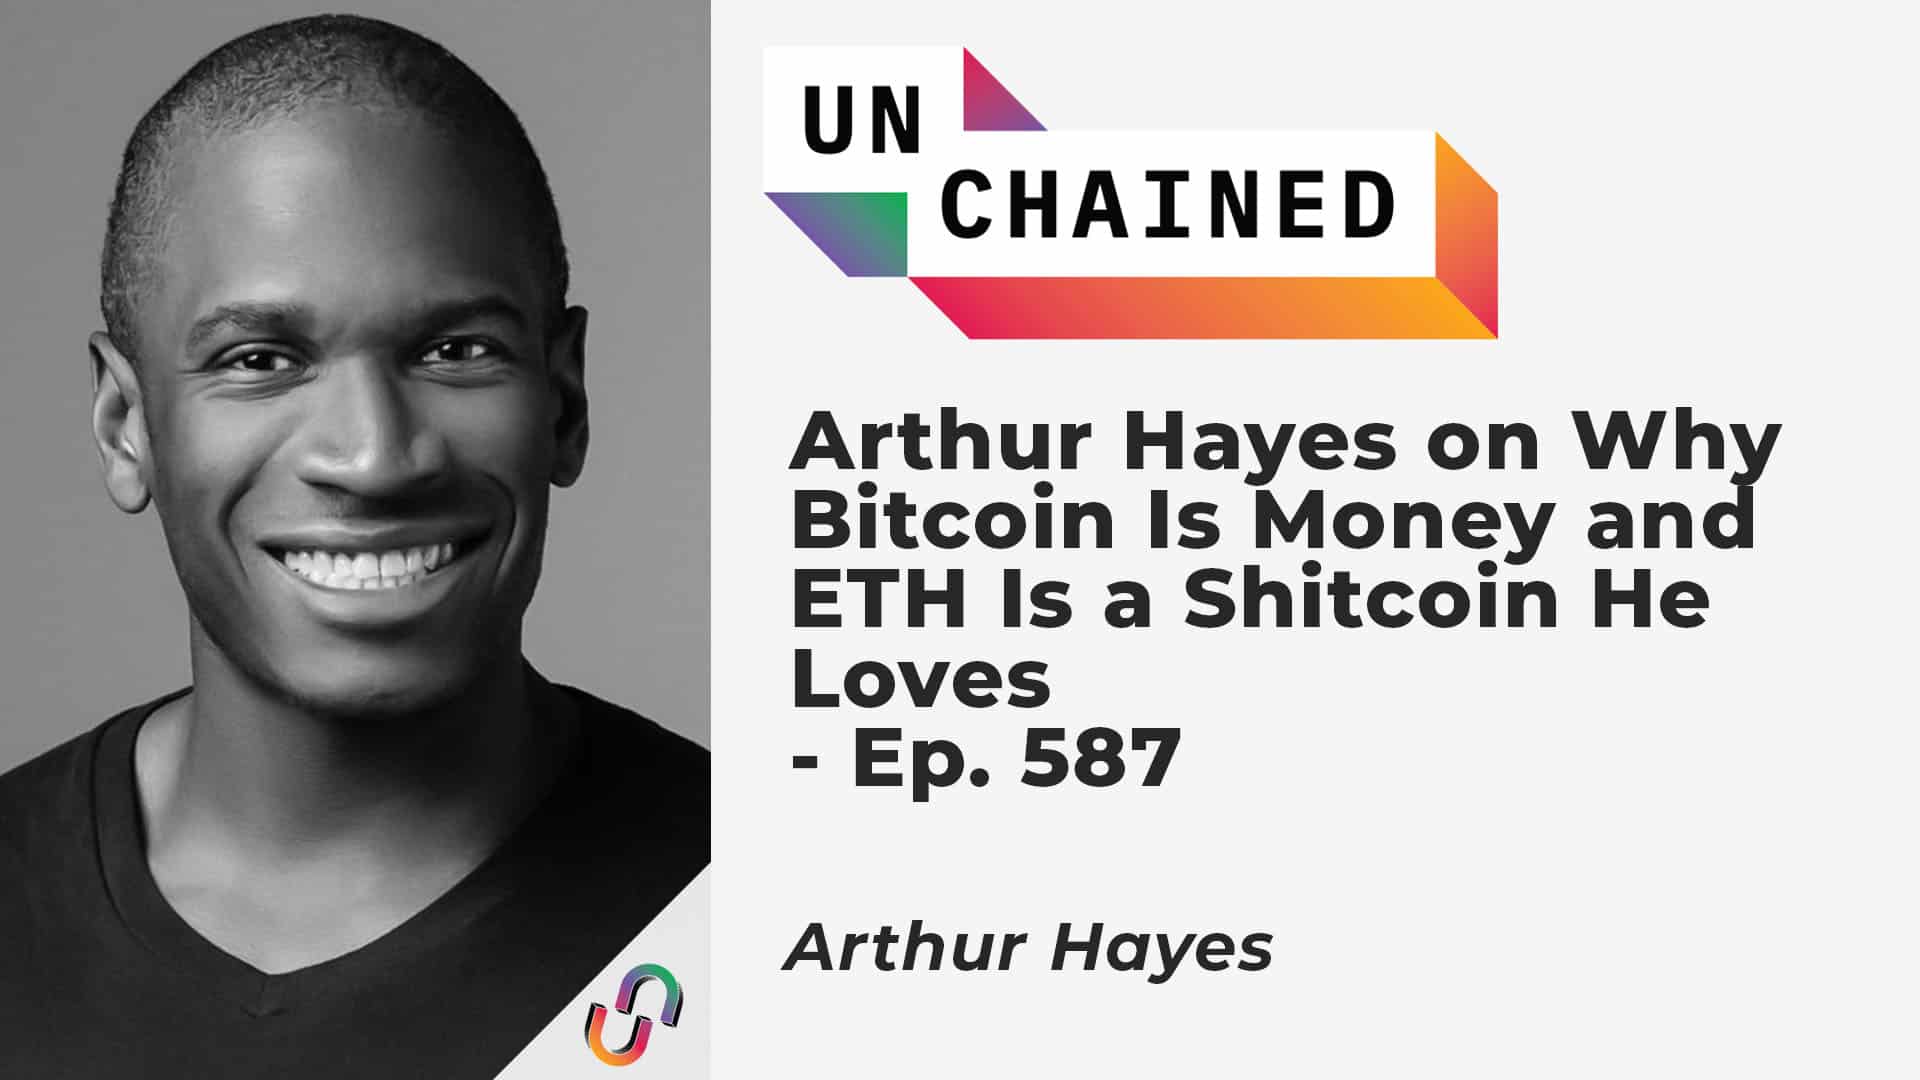 Arthur Hayes on Why Bitcoin Is Money and ETH Is a Shitcoin He Loves - Ep. 587